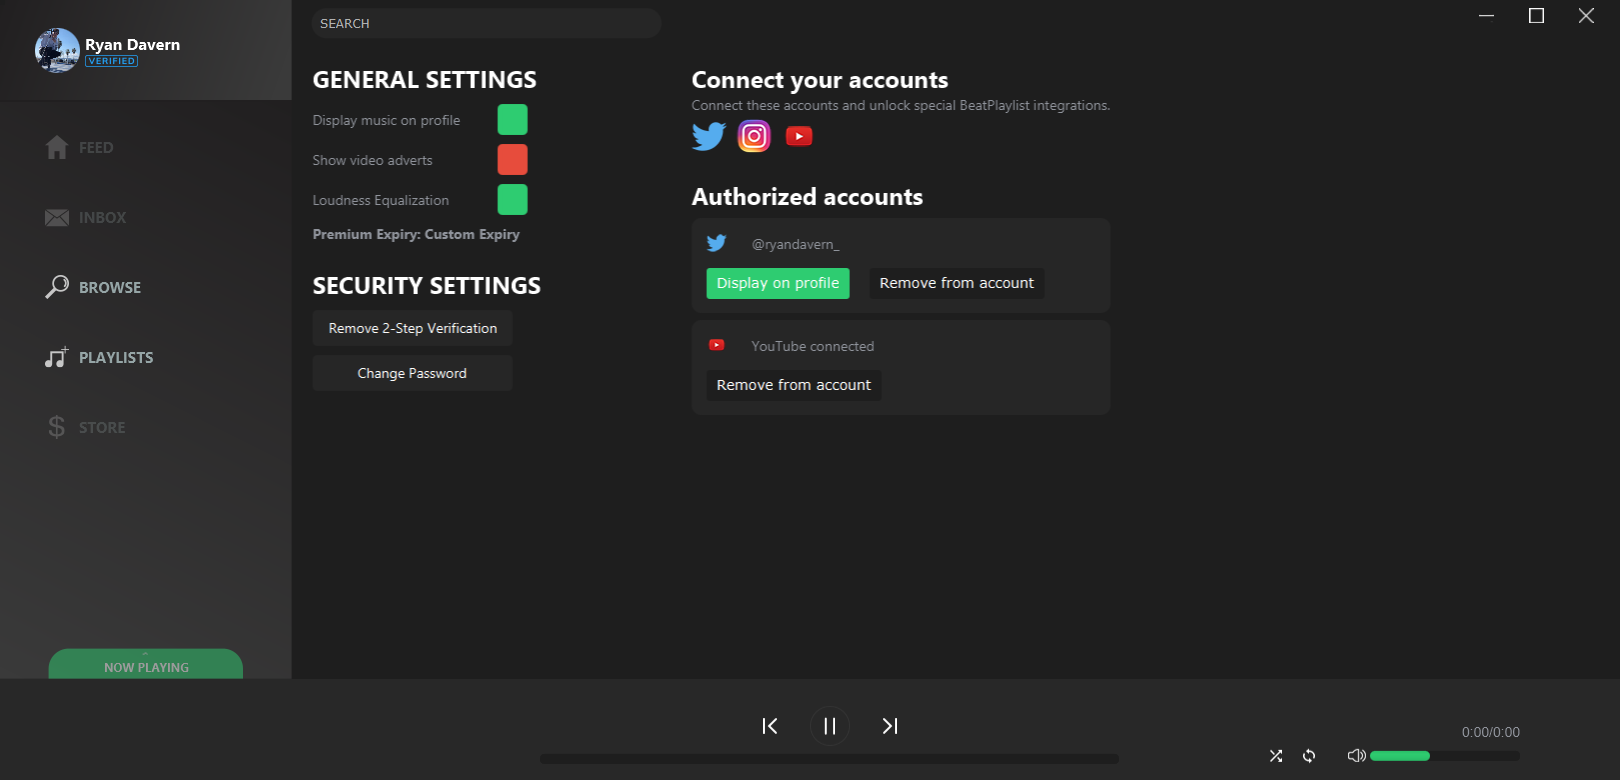 User Settings Page. Users can sign-in to their Google account to enable playlist syncing and age restricted YouTube content.